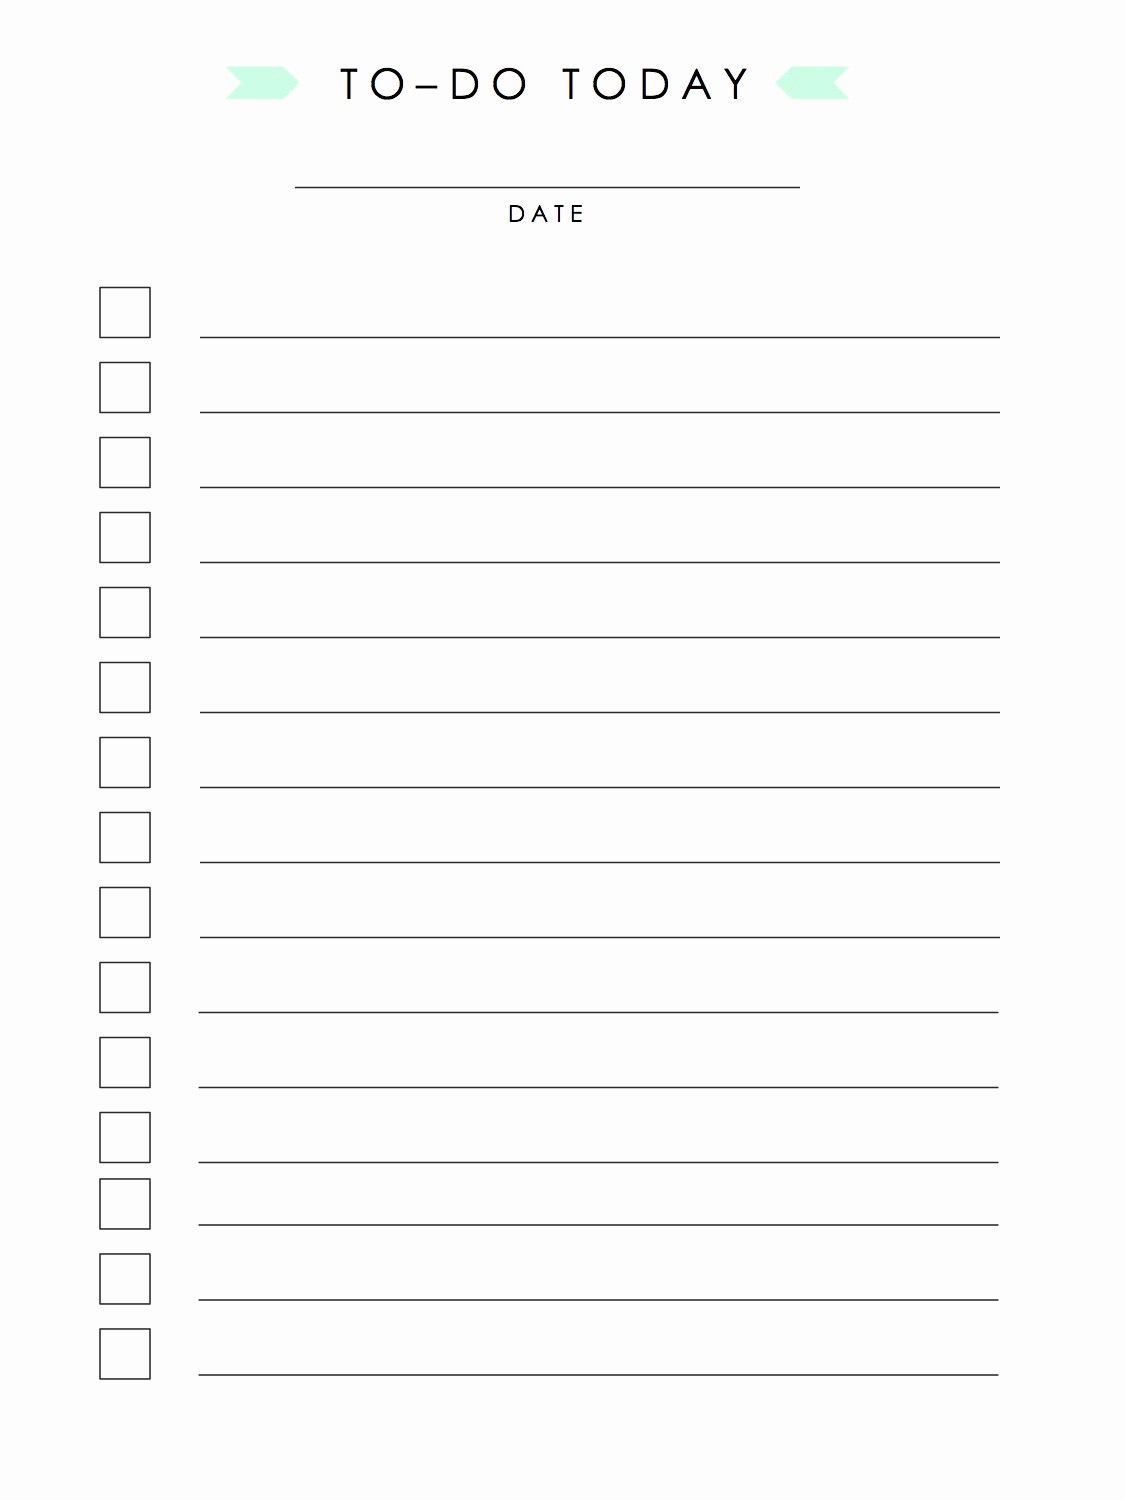 Today to Do List Template Best Of Template Inspiring to Do List Template to Do List Template